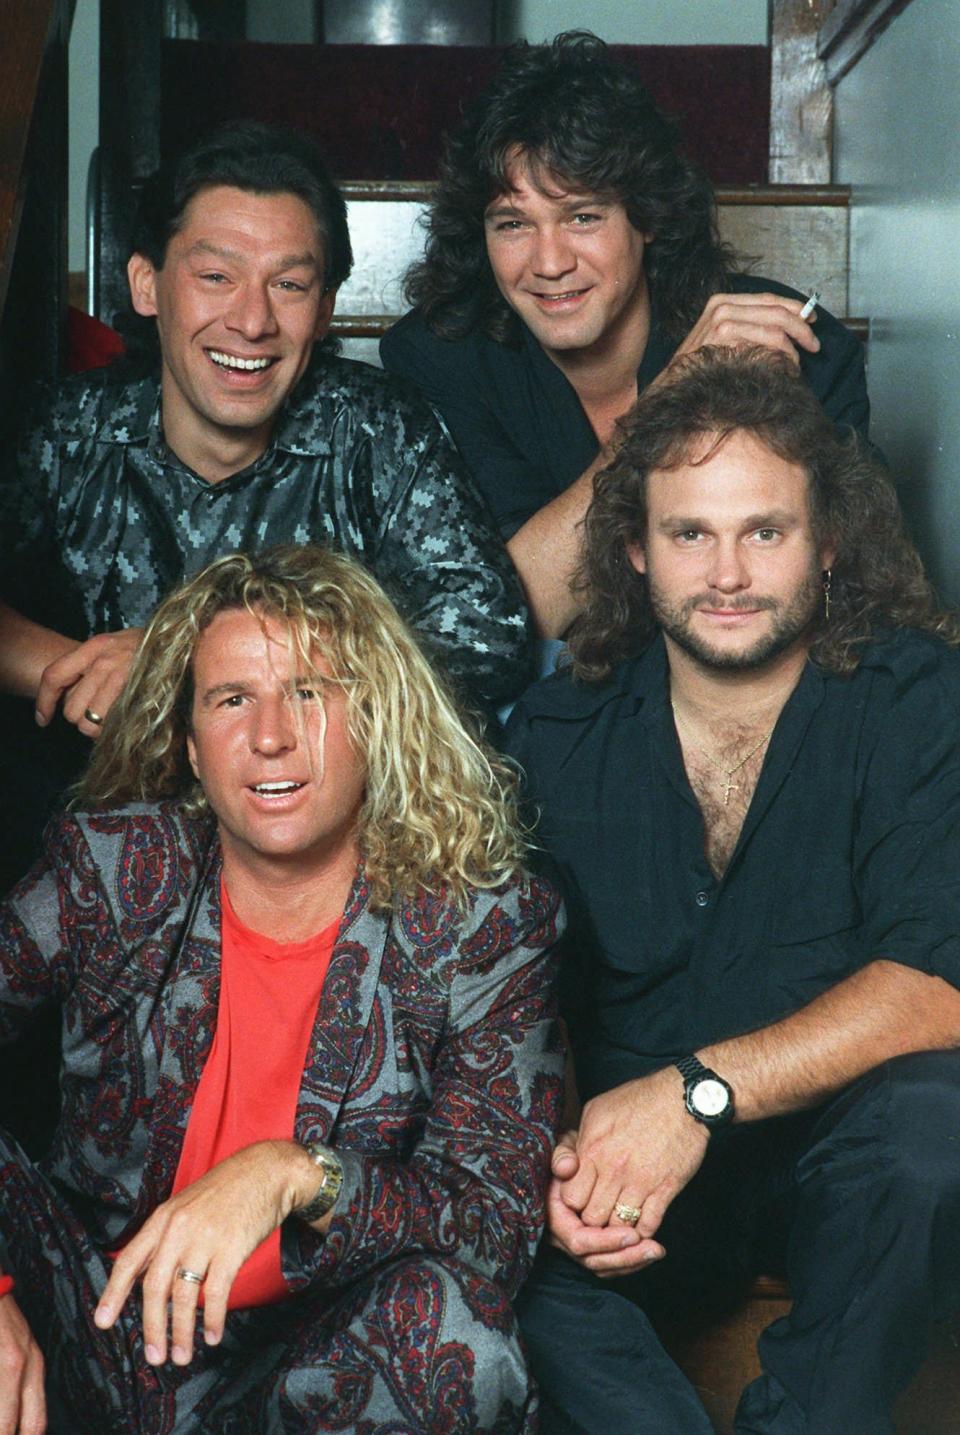 Sammy Hagar, bottom left, joins his Van Halen bandmates in this photo taken during happier times. In 1996, Hagar was asked to leave the band, whose founders Eddie (top right) and Alex (top left) Van Halen decided to reunite with original singer David Lee Roth. Bassist Michael Anthony is bottom right. He and Hagar remain close friends.